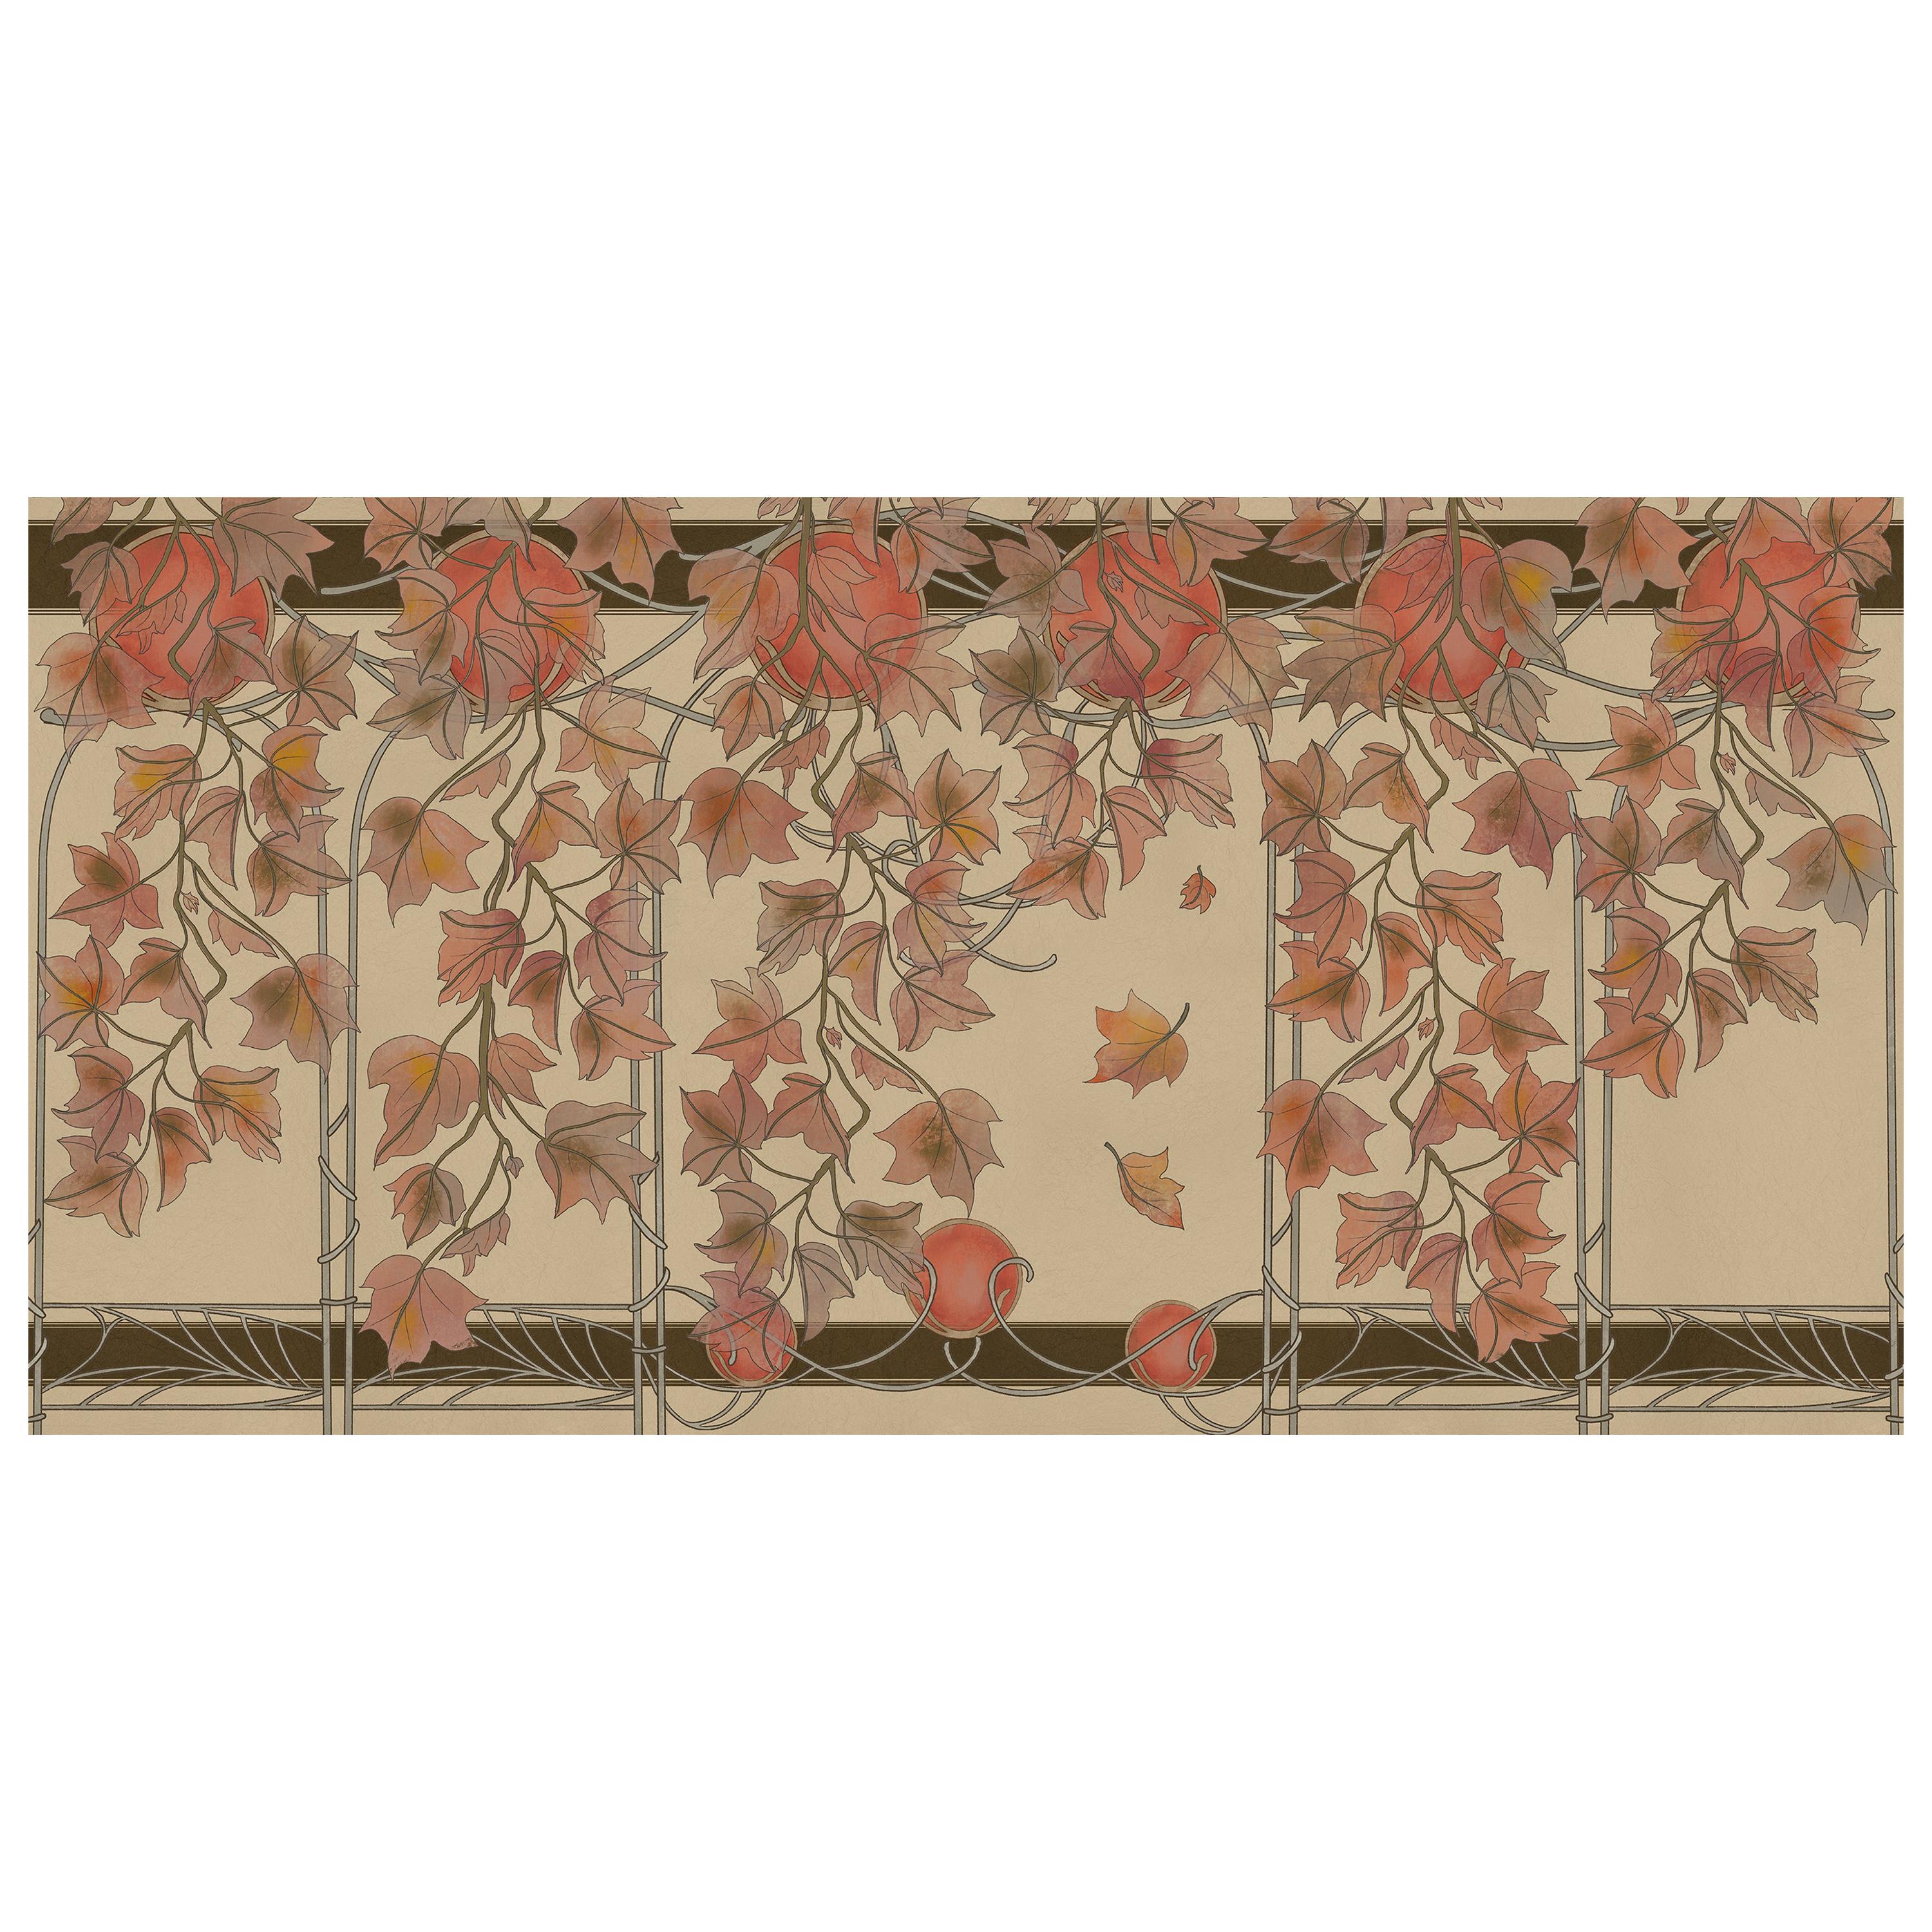 Ornami Art Nouveau Autumn Vinyl Wallpaper Made in Italy Digital Printing For Sale